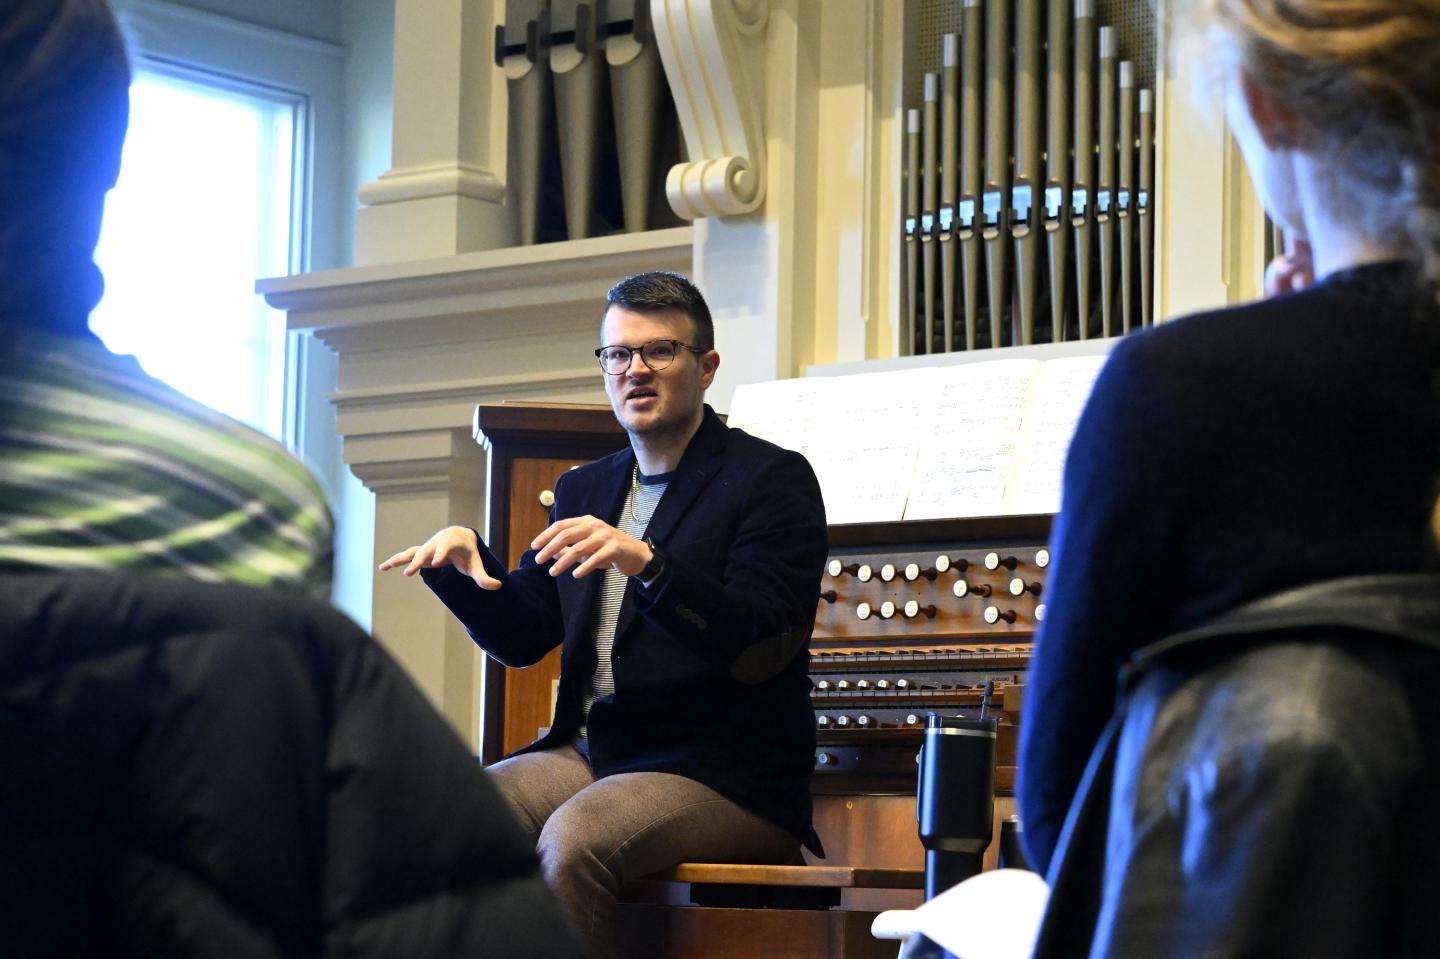 Jordan Prescott leads an Intersession class in front of the organ in Griswold Hall